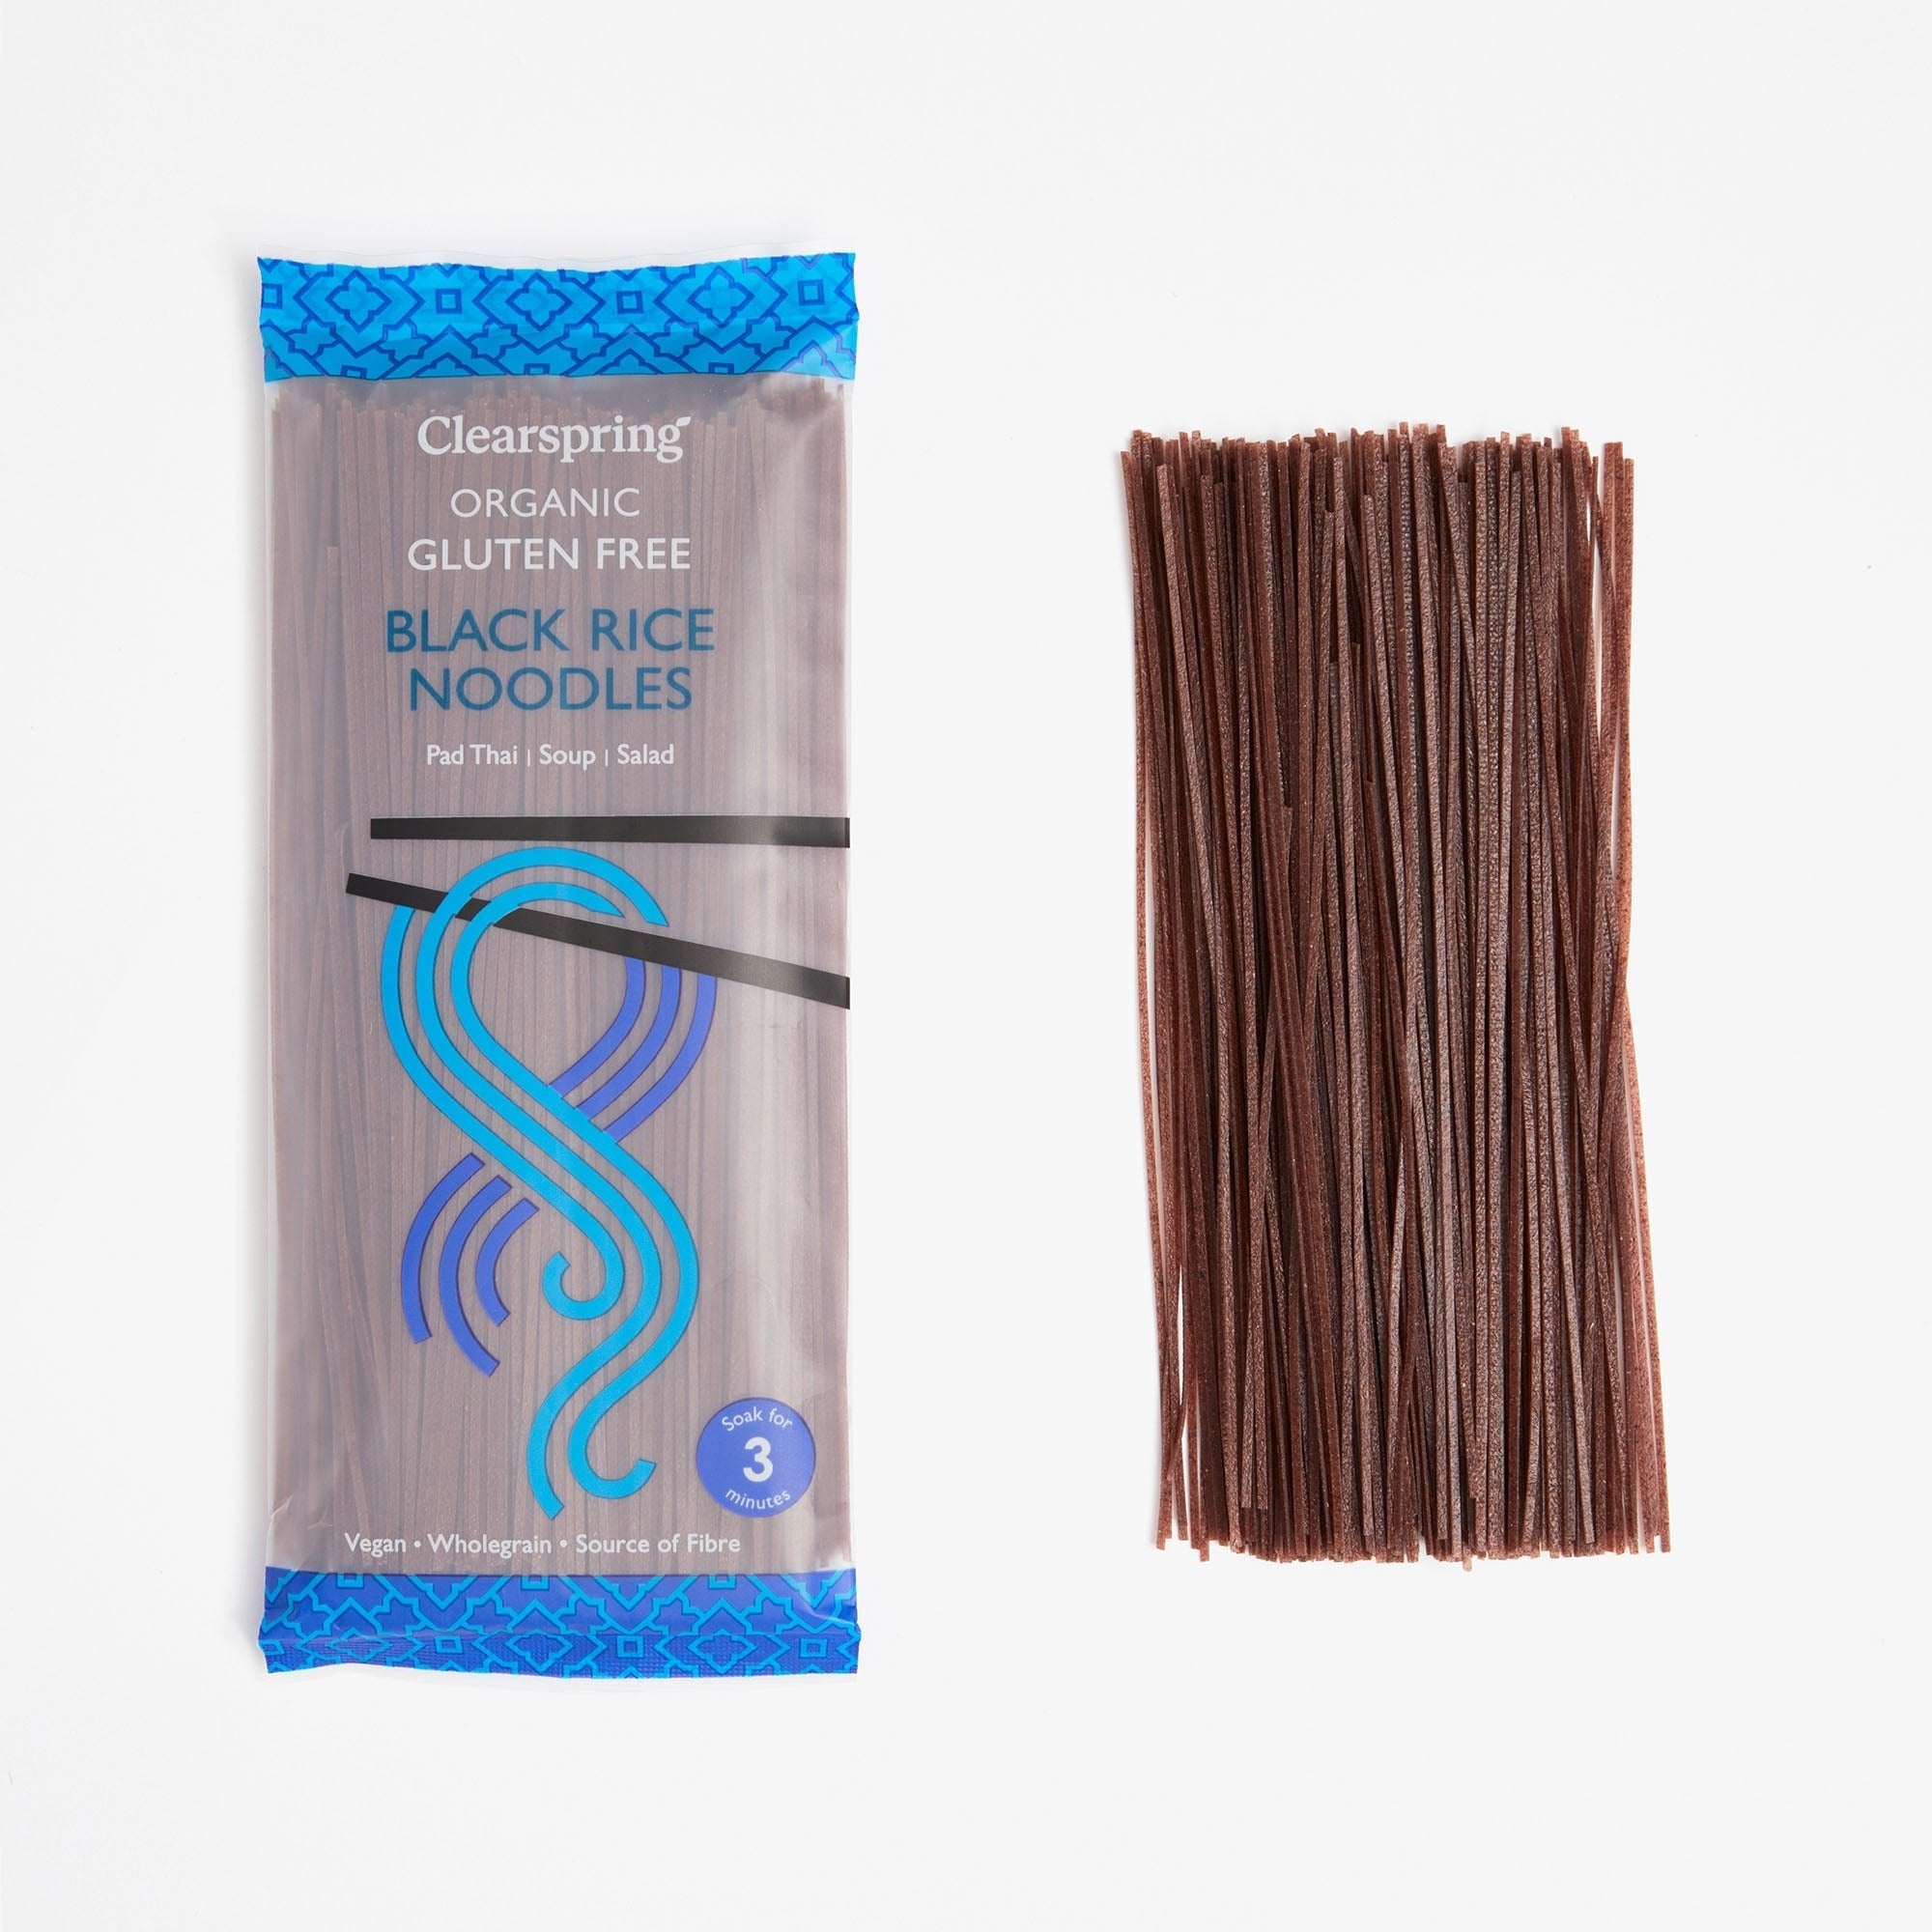 Clearspring Organic Gluten Free Black Rice Noodles (10 Pack)